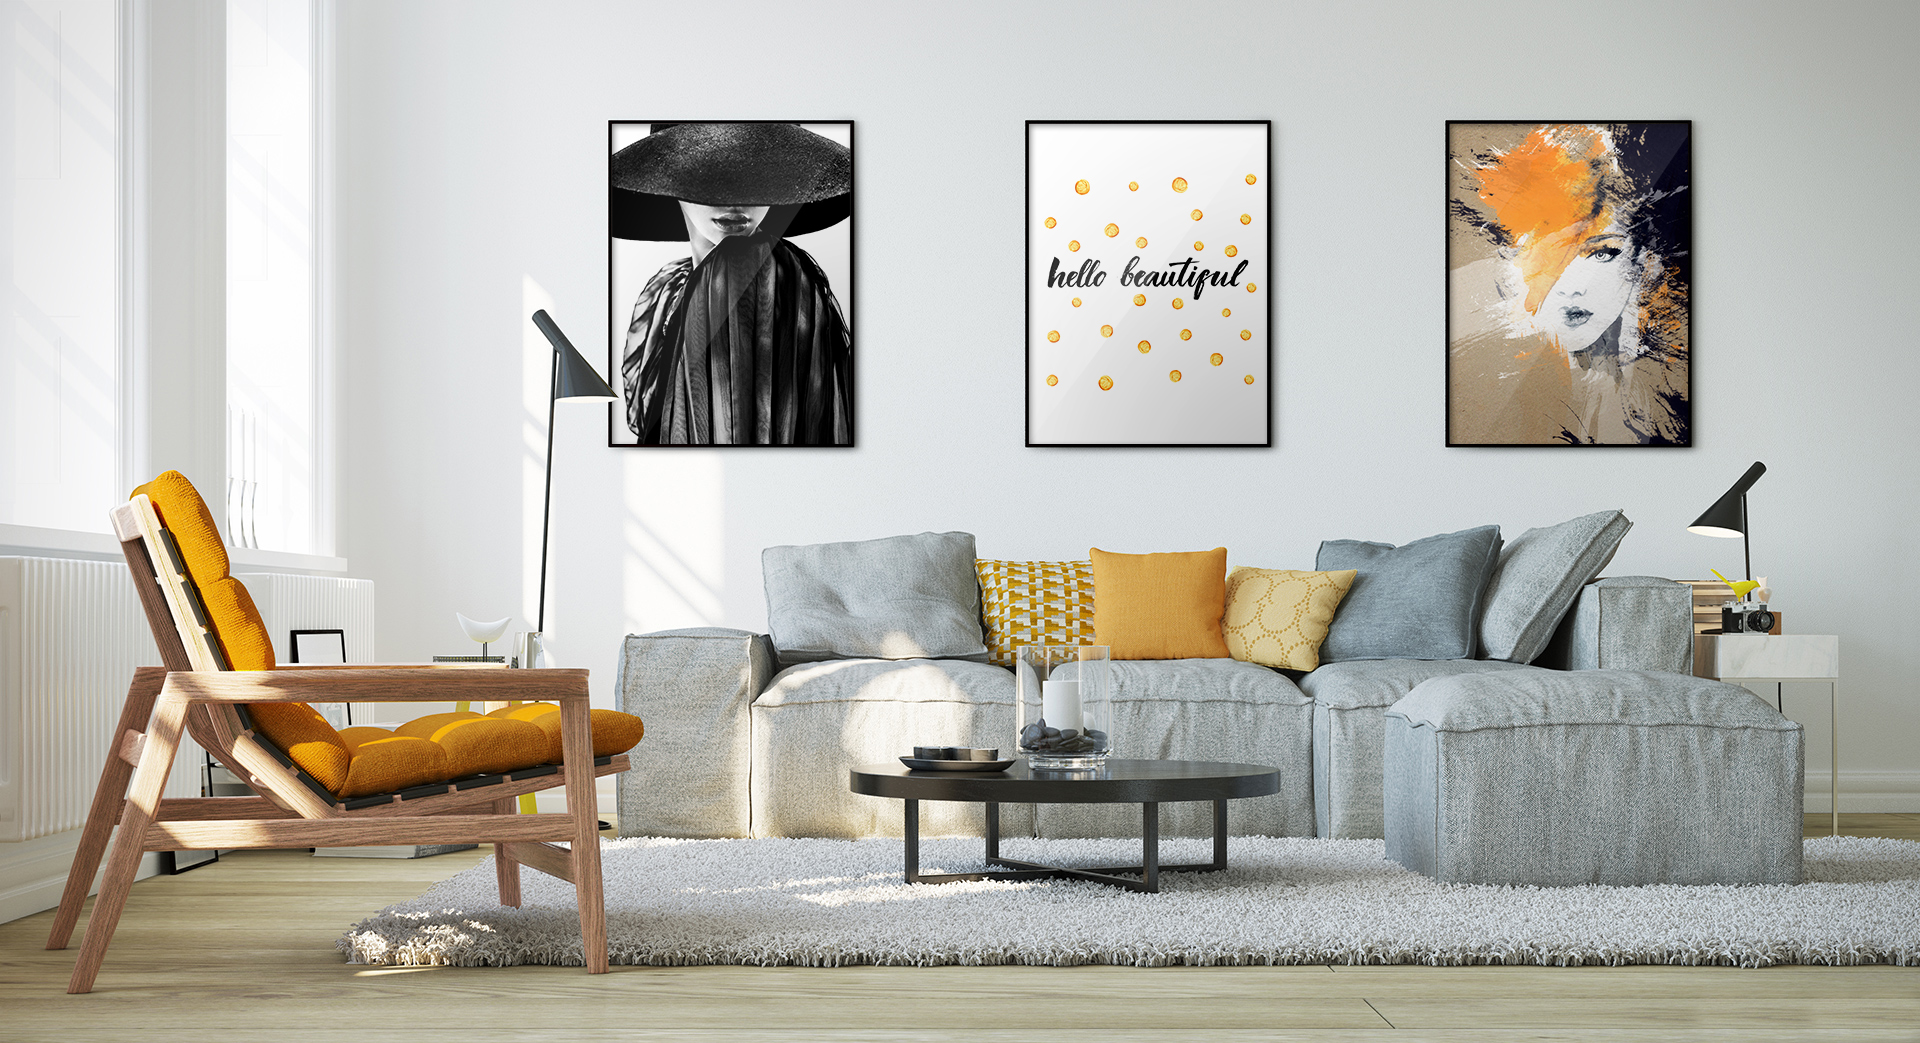 Hello Beautiful • Living room - Contemporary - People - Art & lifestyle - Posters